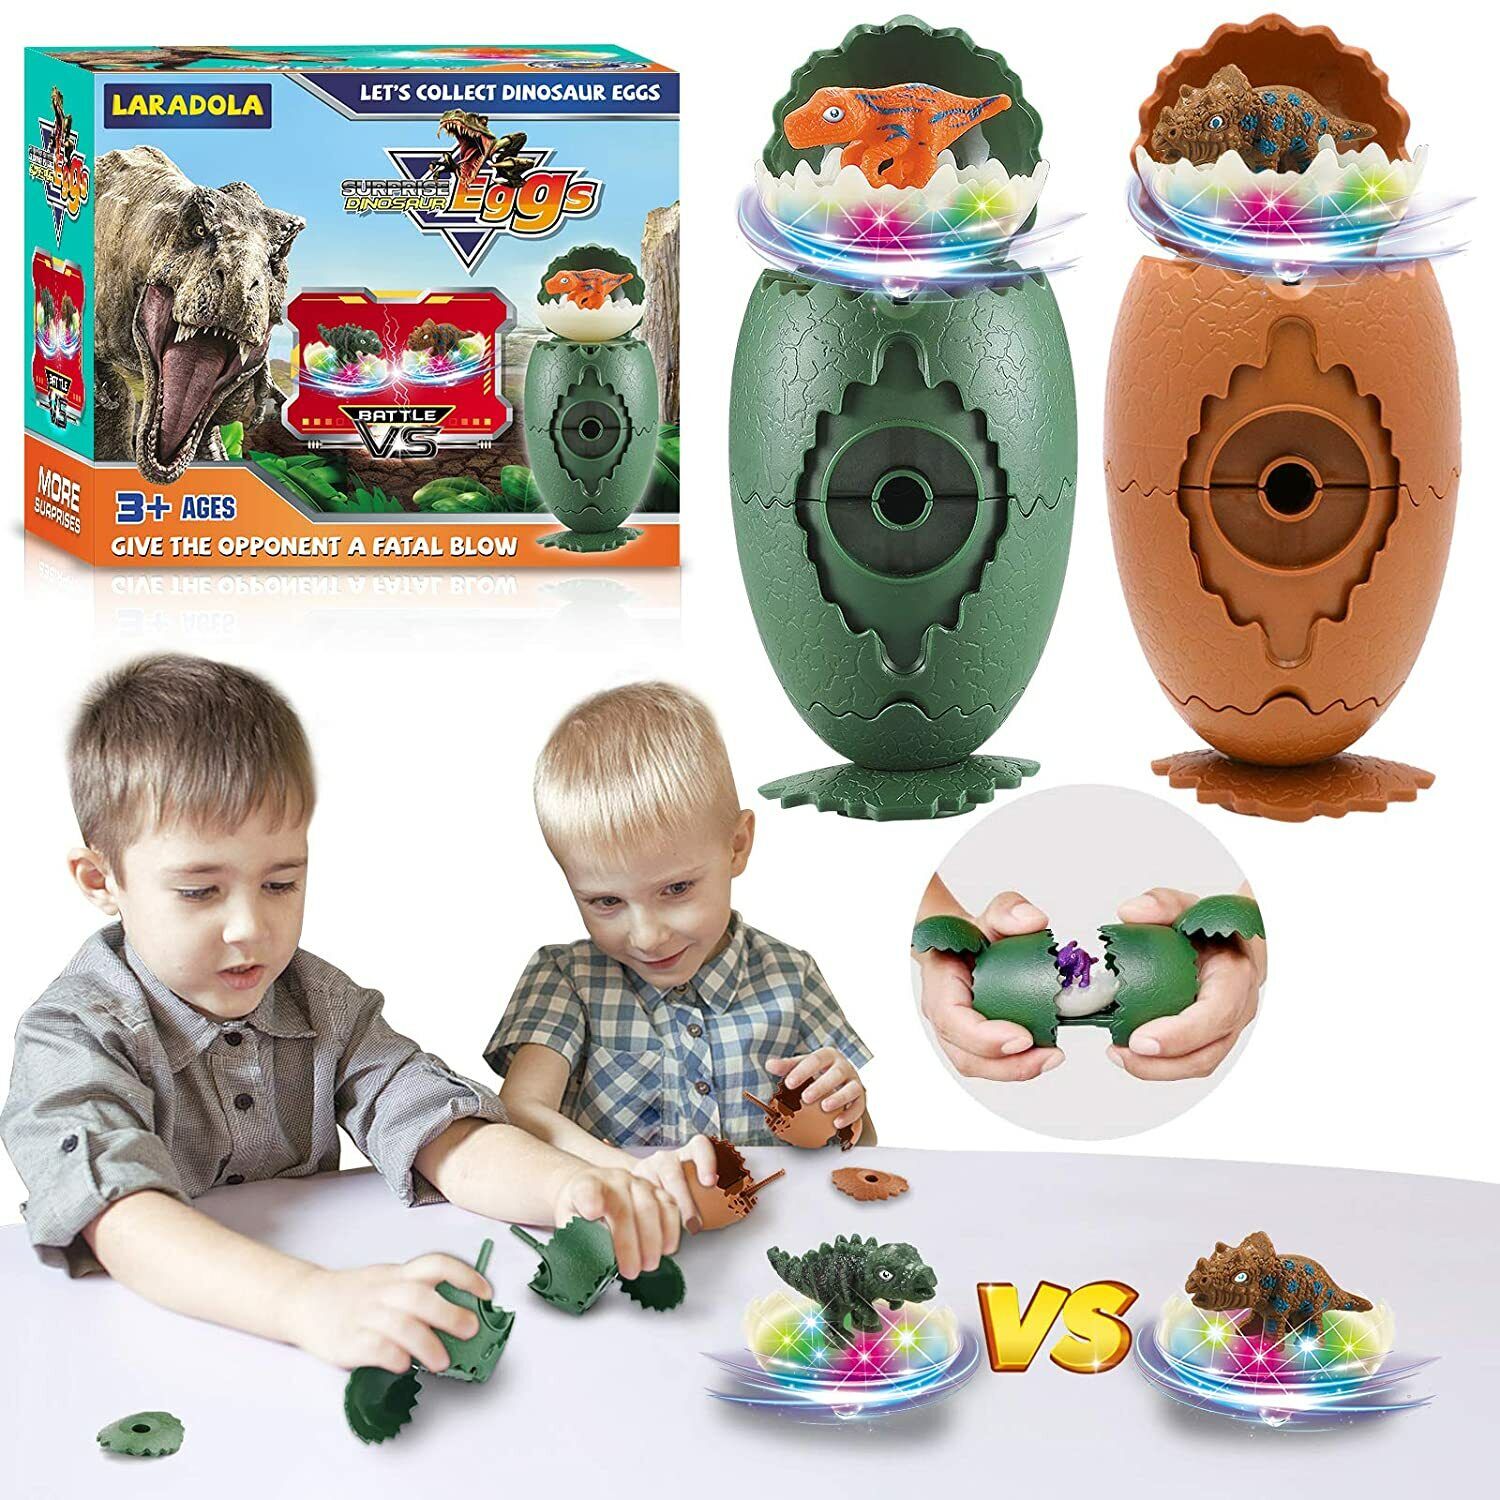 Plastic Easter Eggs With Dinosaurs Toys Inside, Gifts For Kids 3 4 5 6 7 8 Years